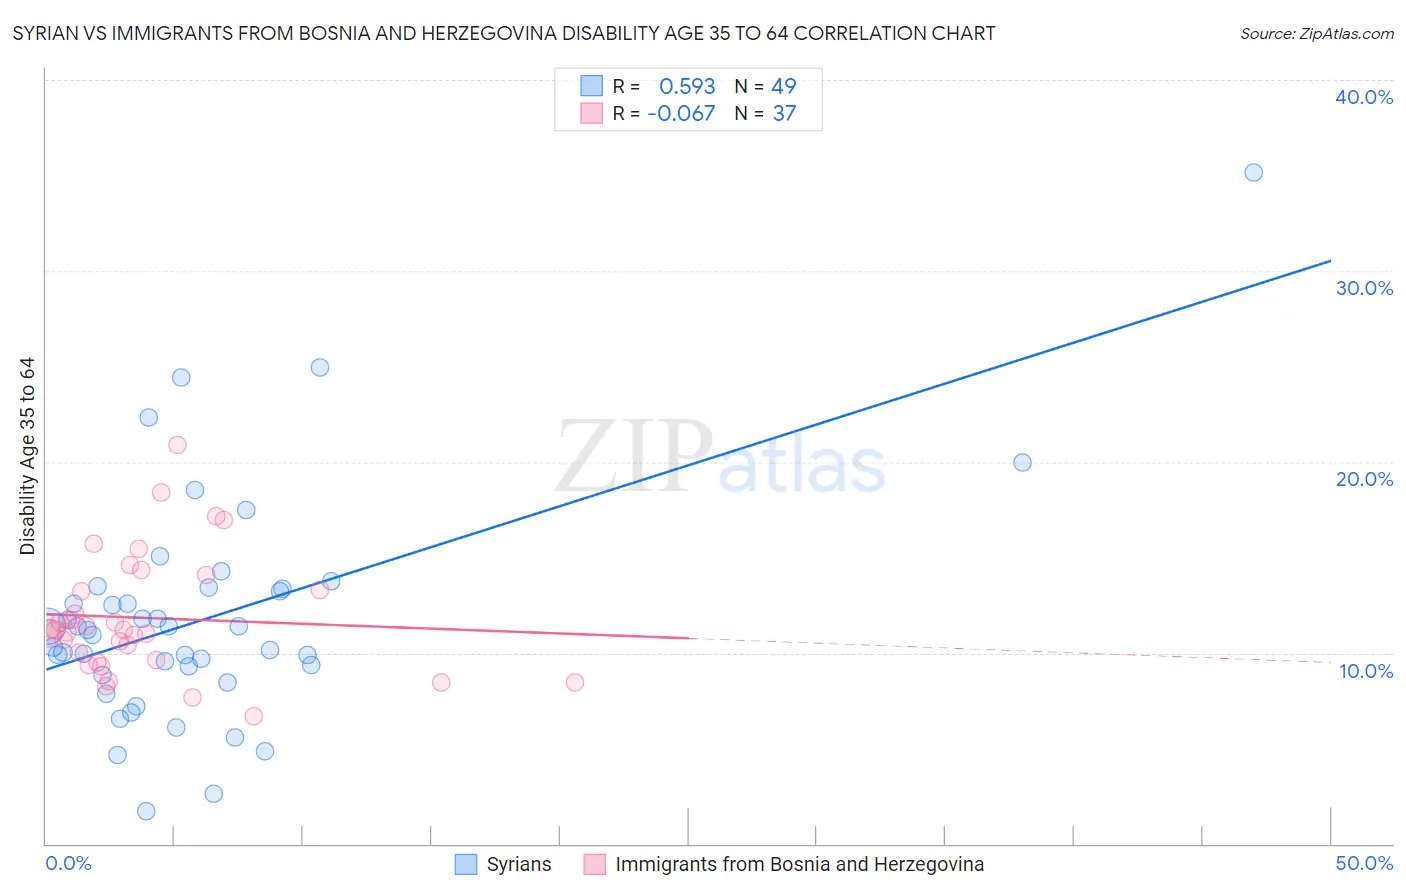 Syrian vs Immigrants from Bosnia and Herzegovina Disability Age 35 to 64